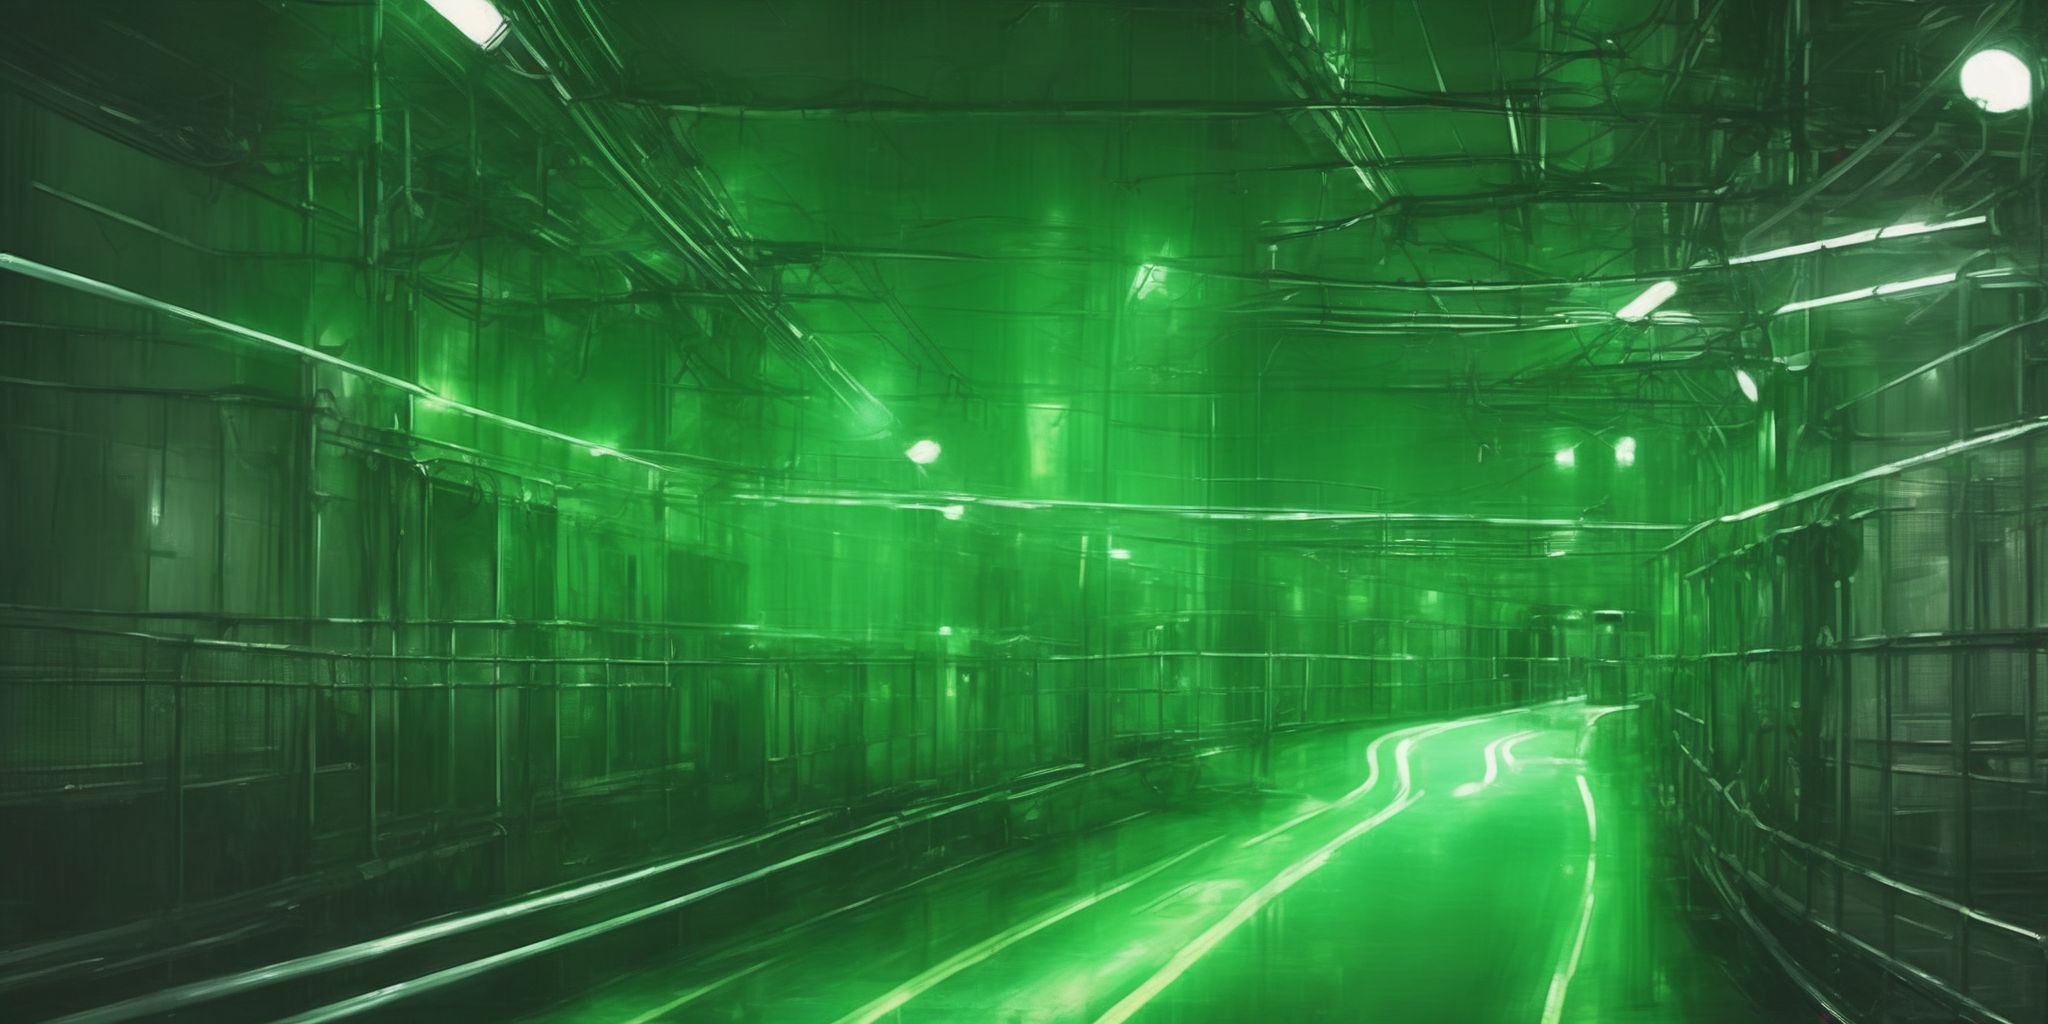 Green light  in realistic, photographic style